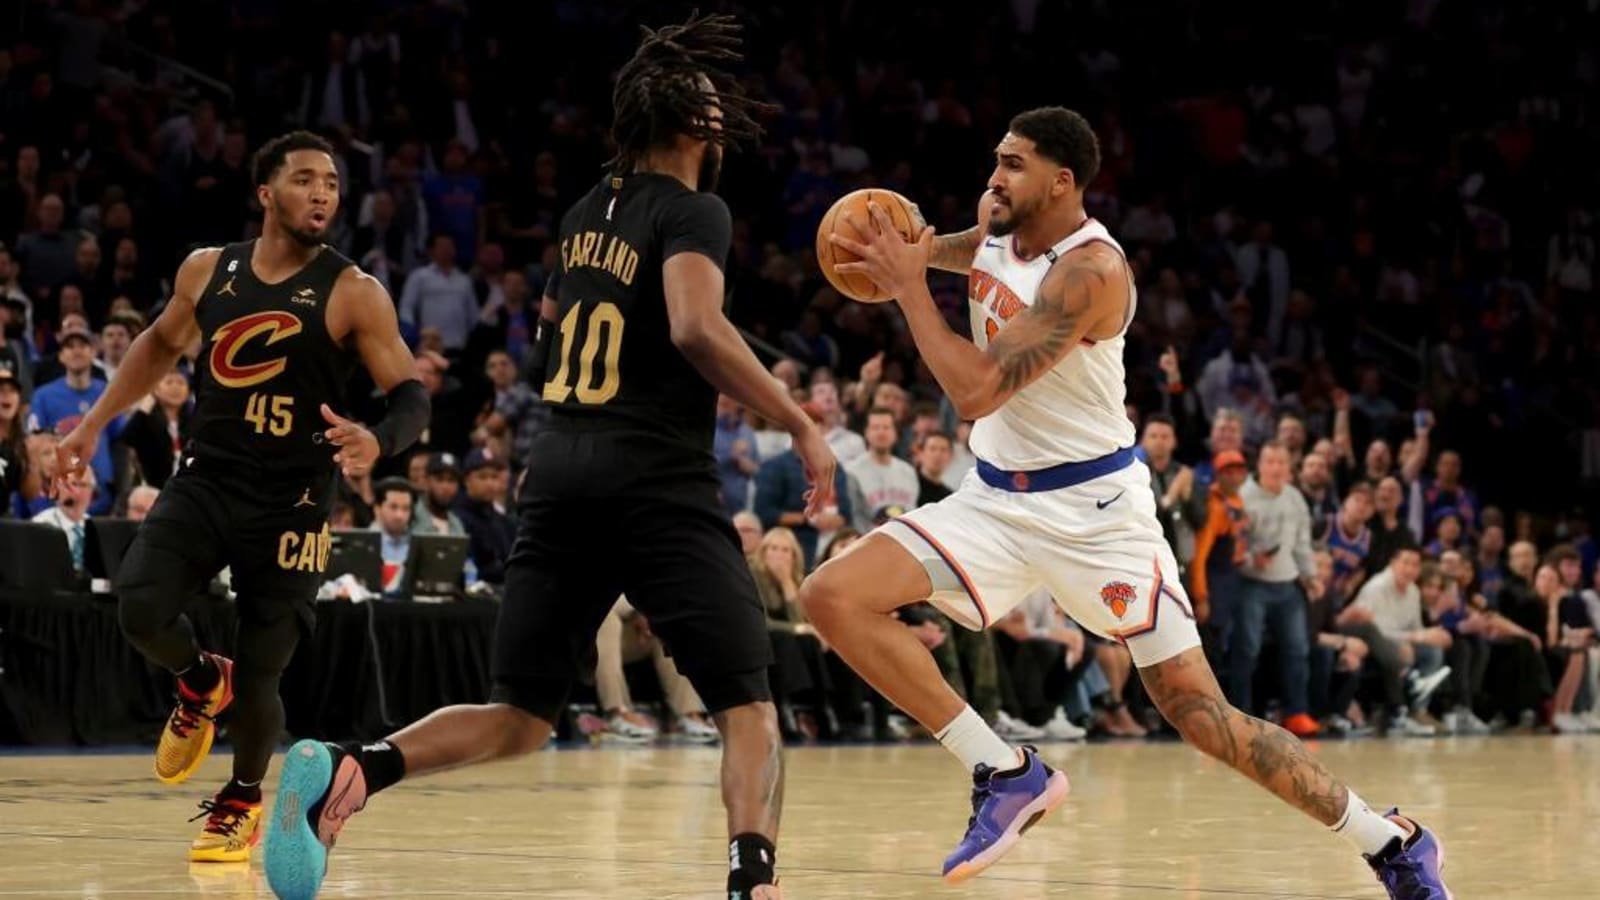 Watch New York Knicks vs. Cleveland Cavaliers Online in the NBA Playoffs (Game 4) – Free Live Streaming, US Start Time and TV Channel